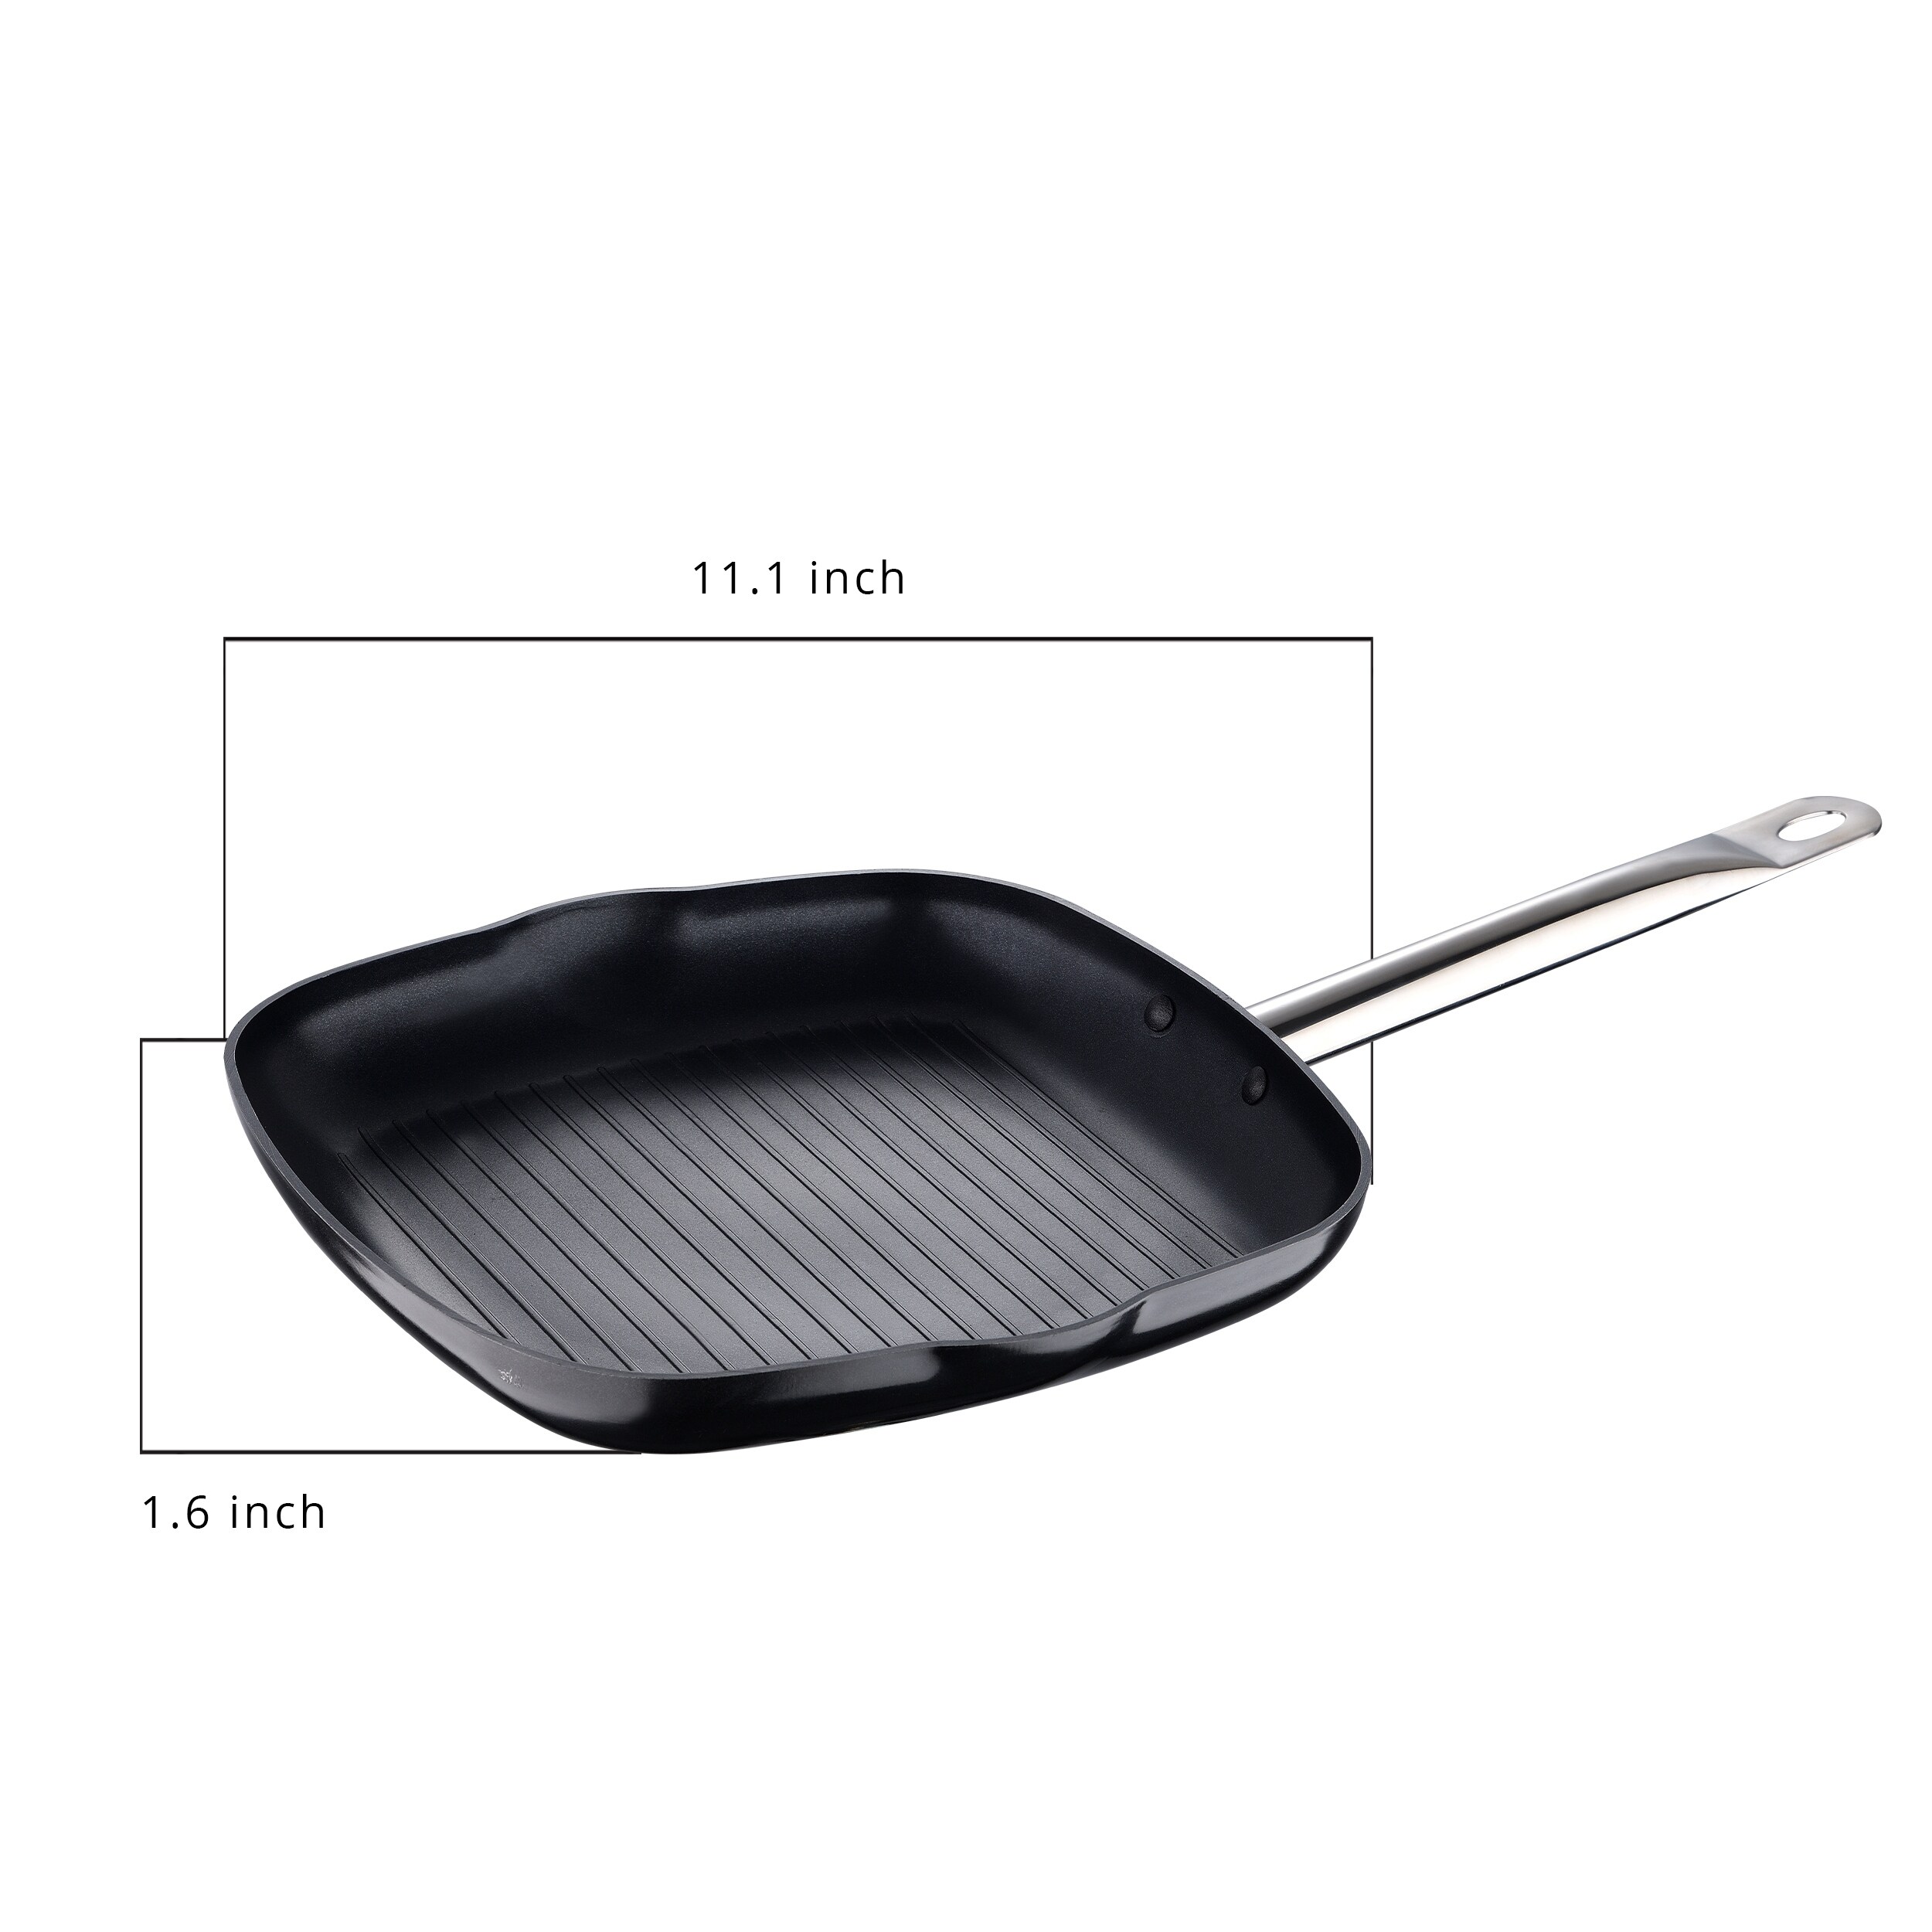 Granitestone Nonstick 4 PC 9.5 inch Deep Square Pan with Fry Basket and Steamer - Black